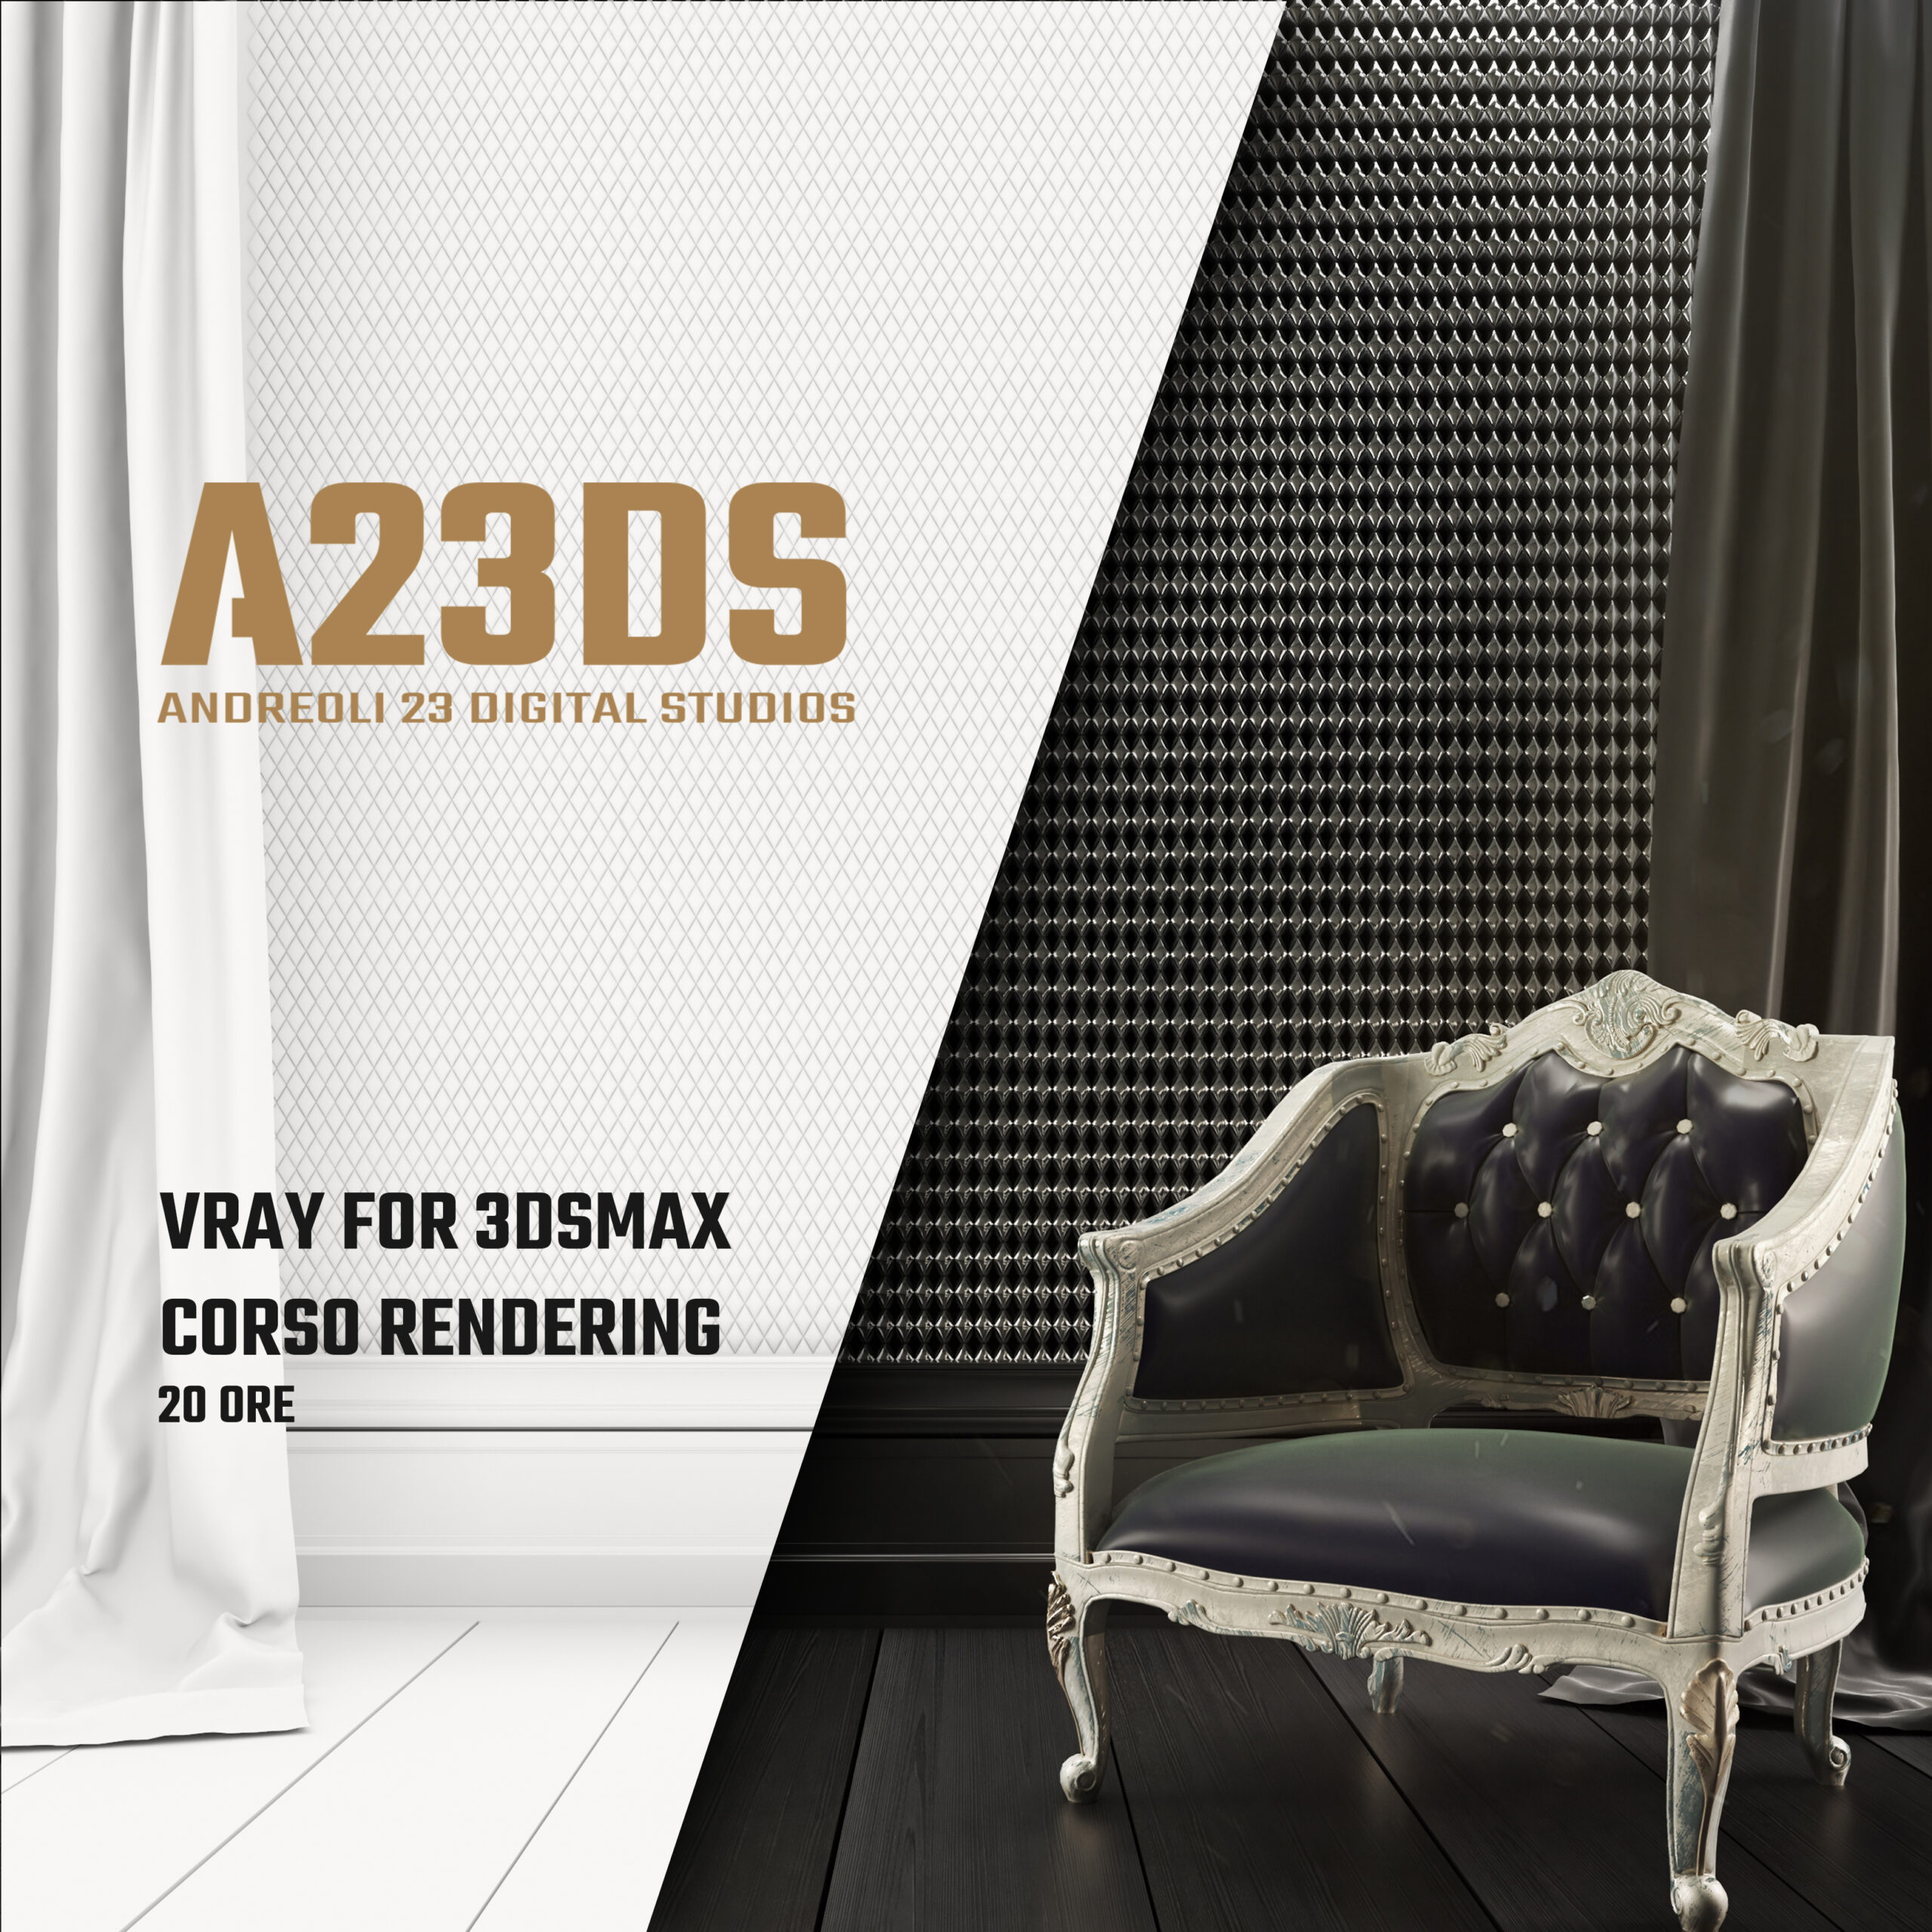 VRAY FOR 3DSMAX